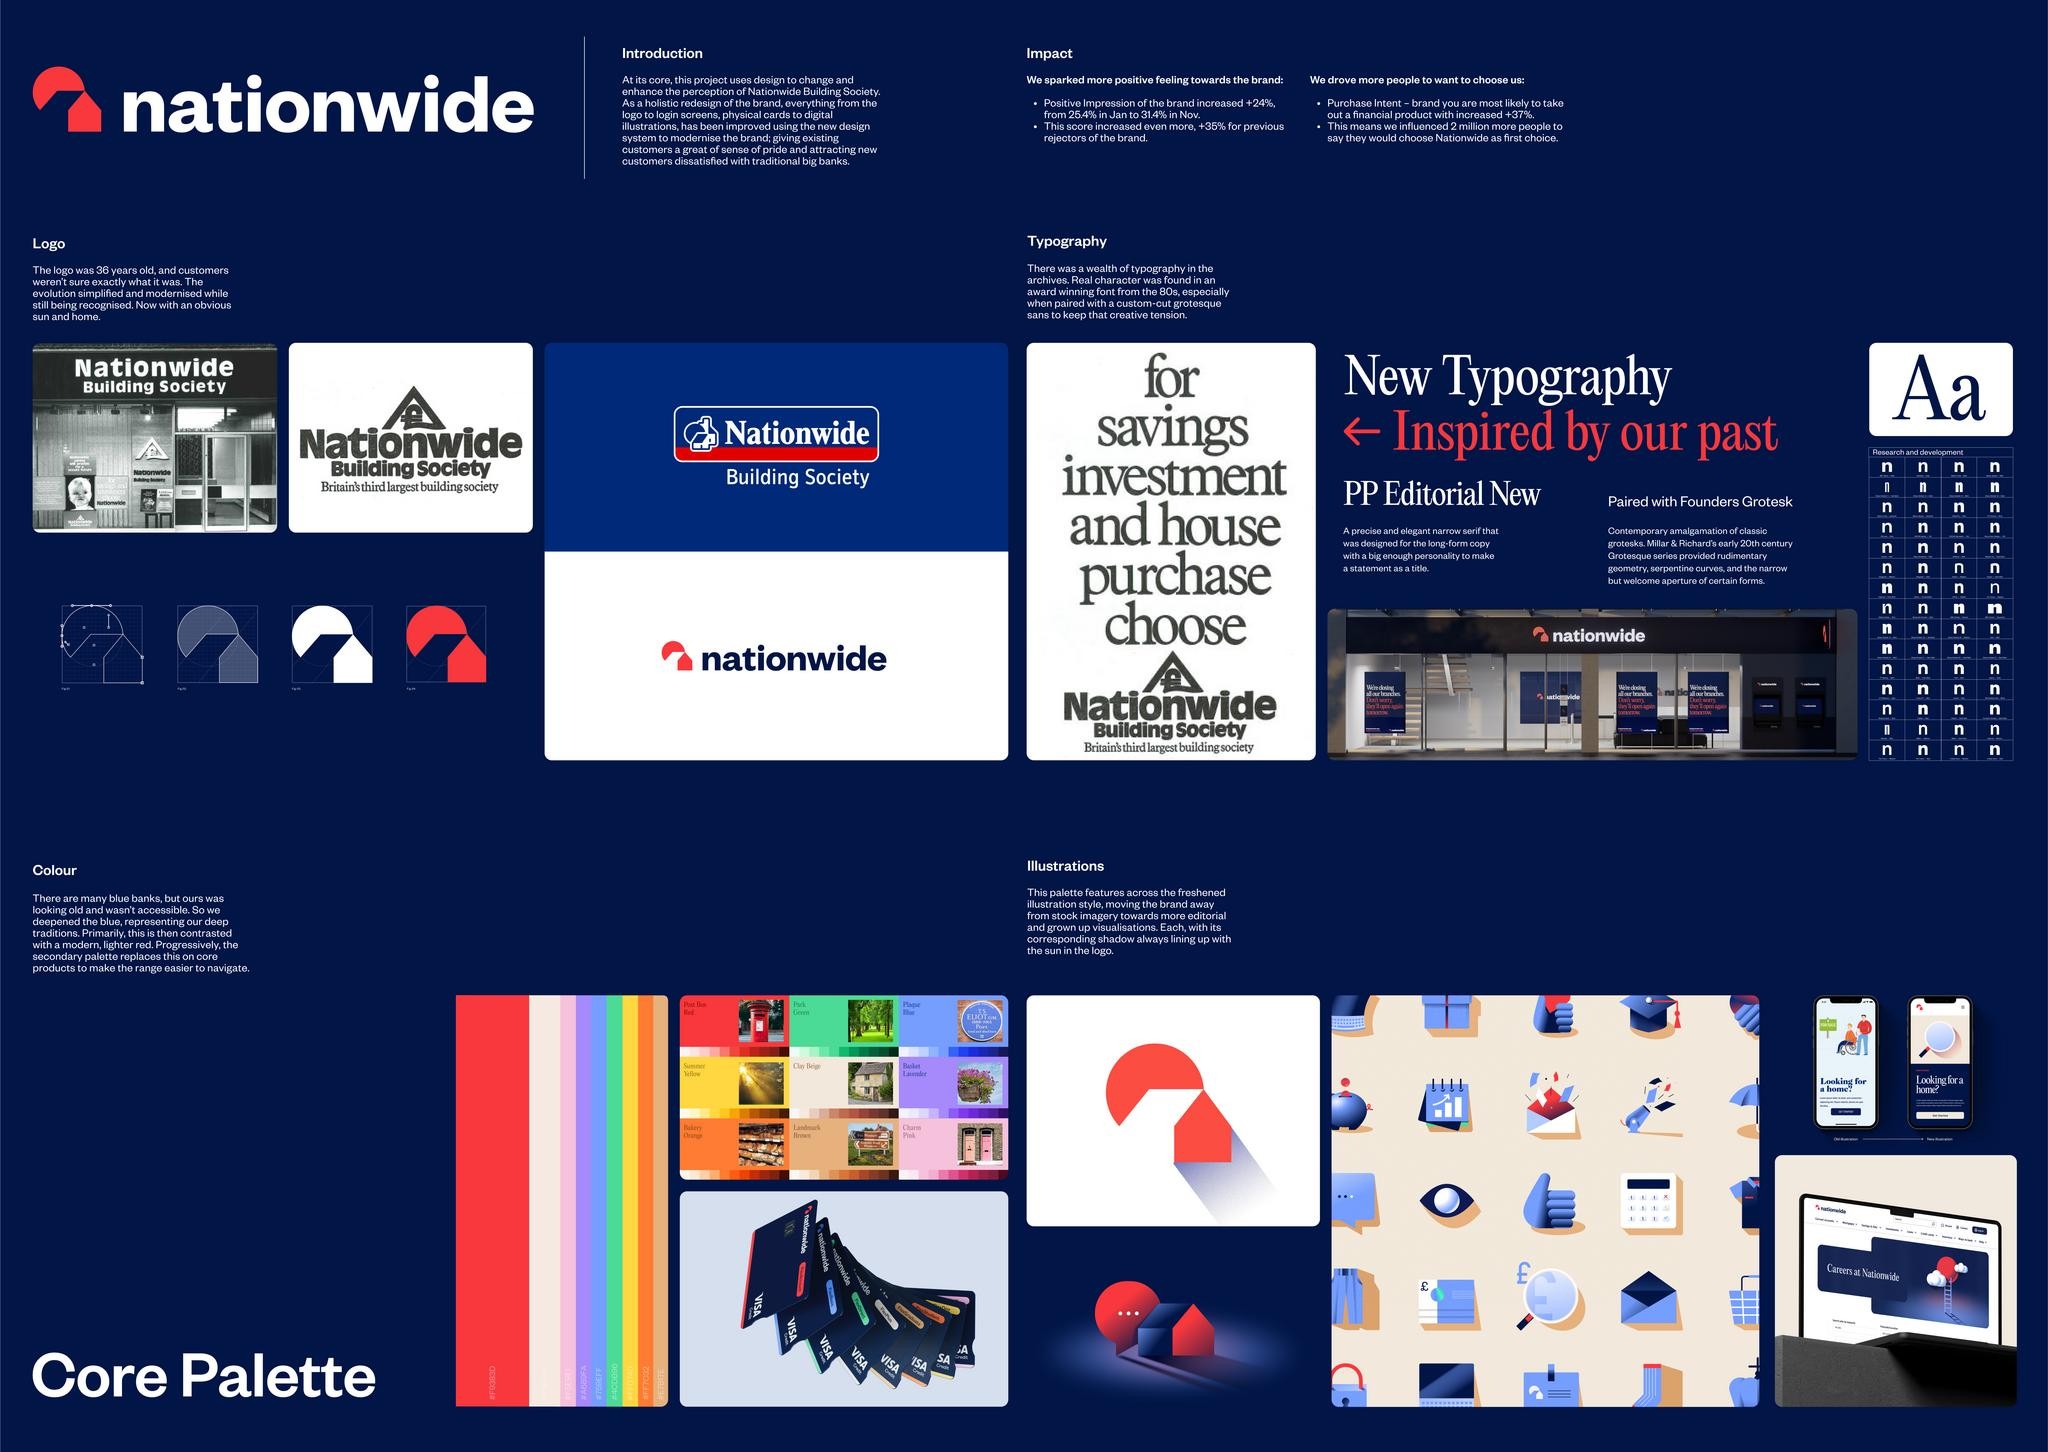 Nationwide embarks on its biggest rebrand in 36 years